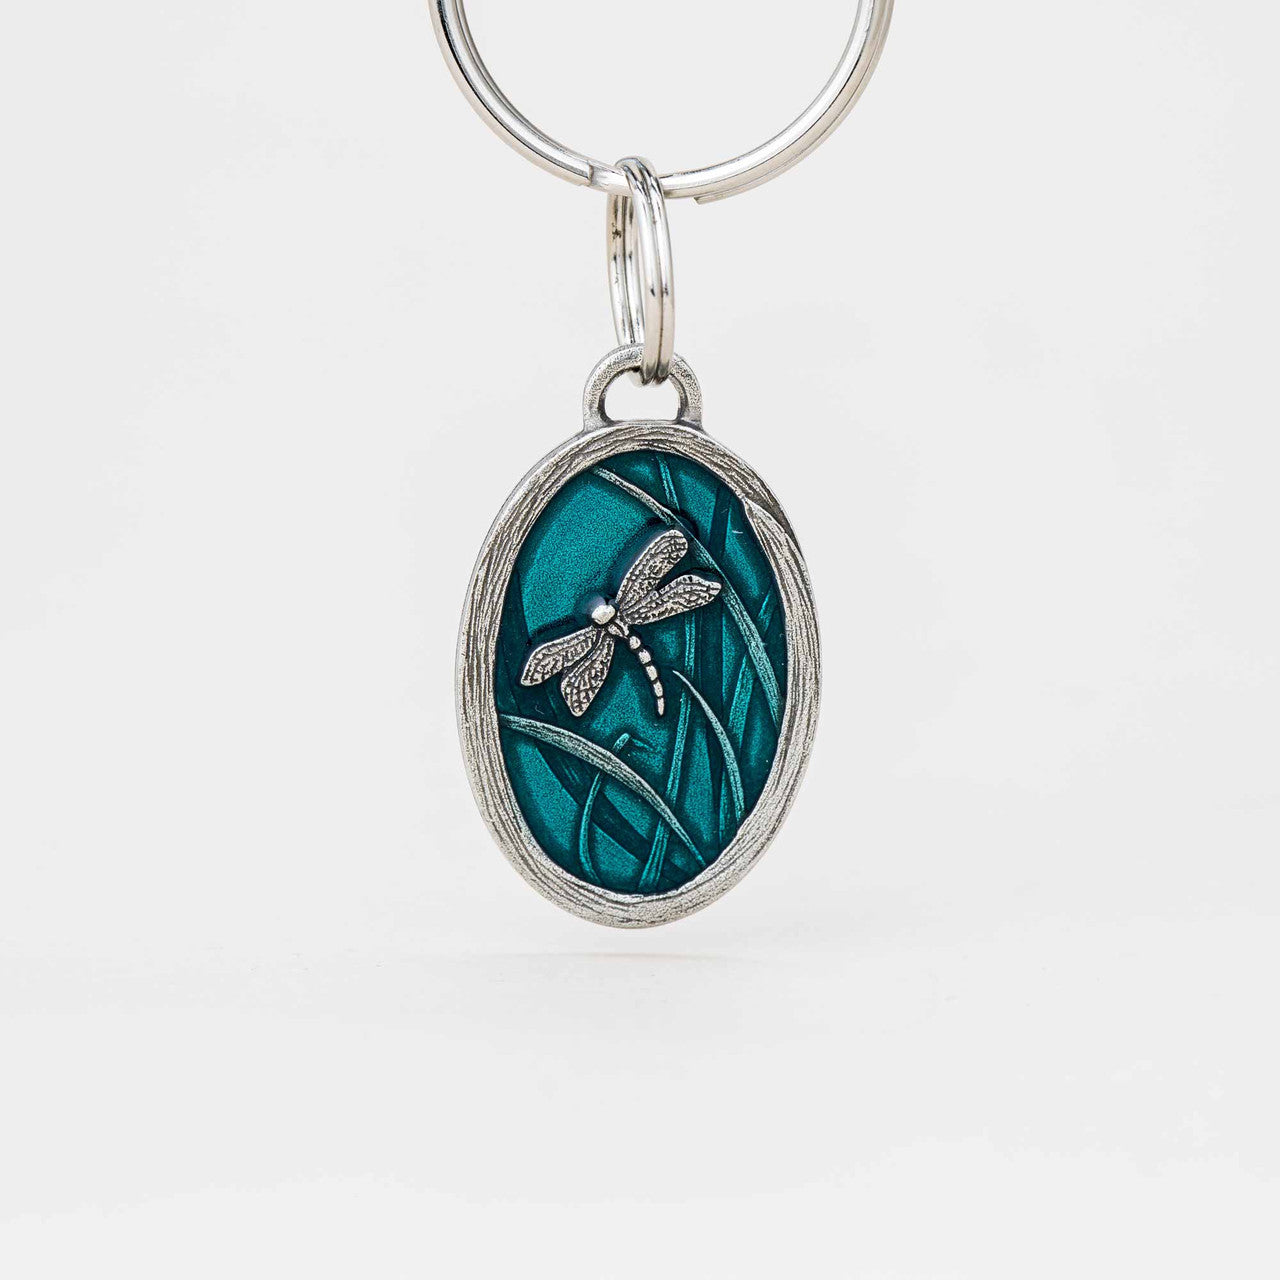 Danforth Pewter blue with dragon fly keyring